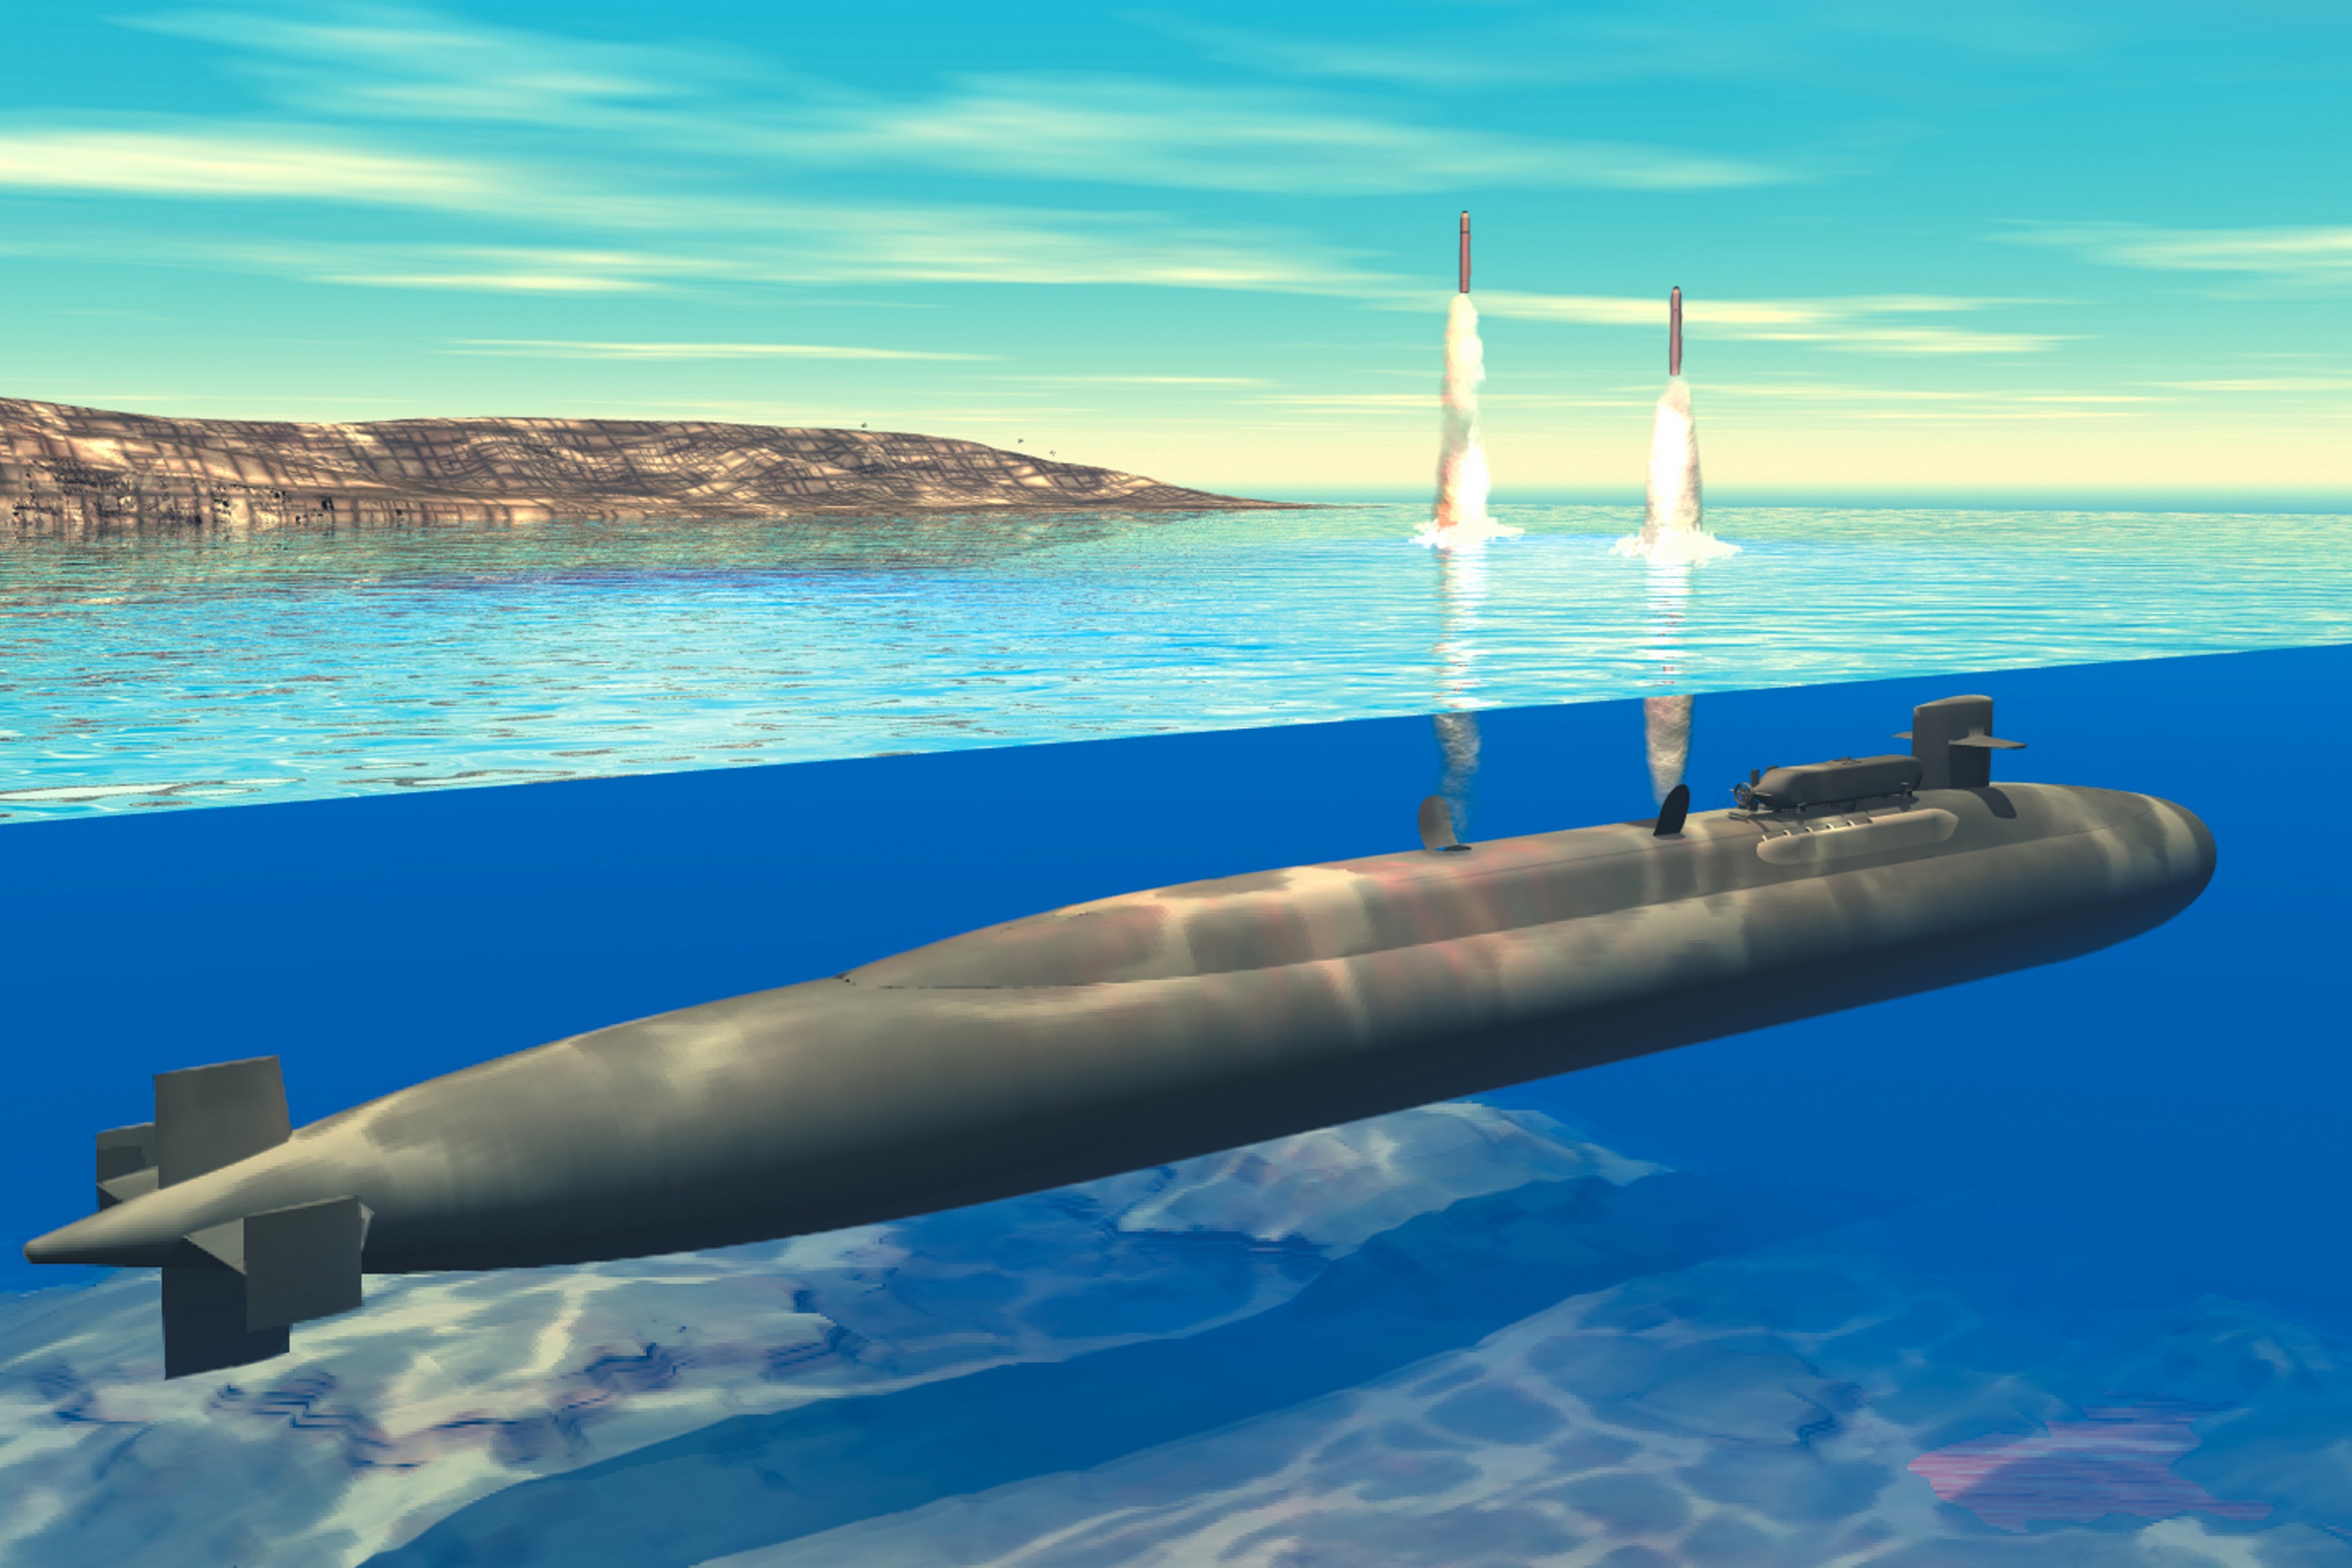 The U.S. Navy Just Signed a Deal to Build the Most Powerful Nuclear